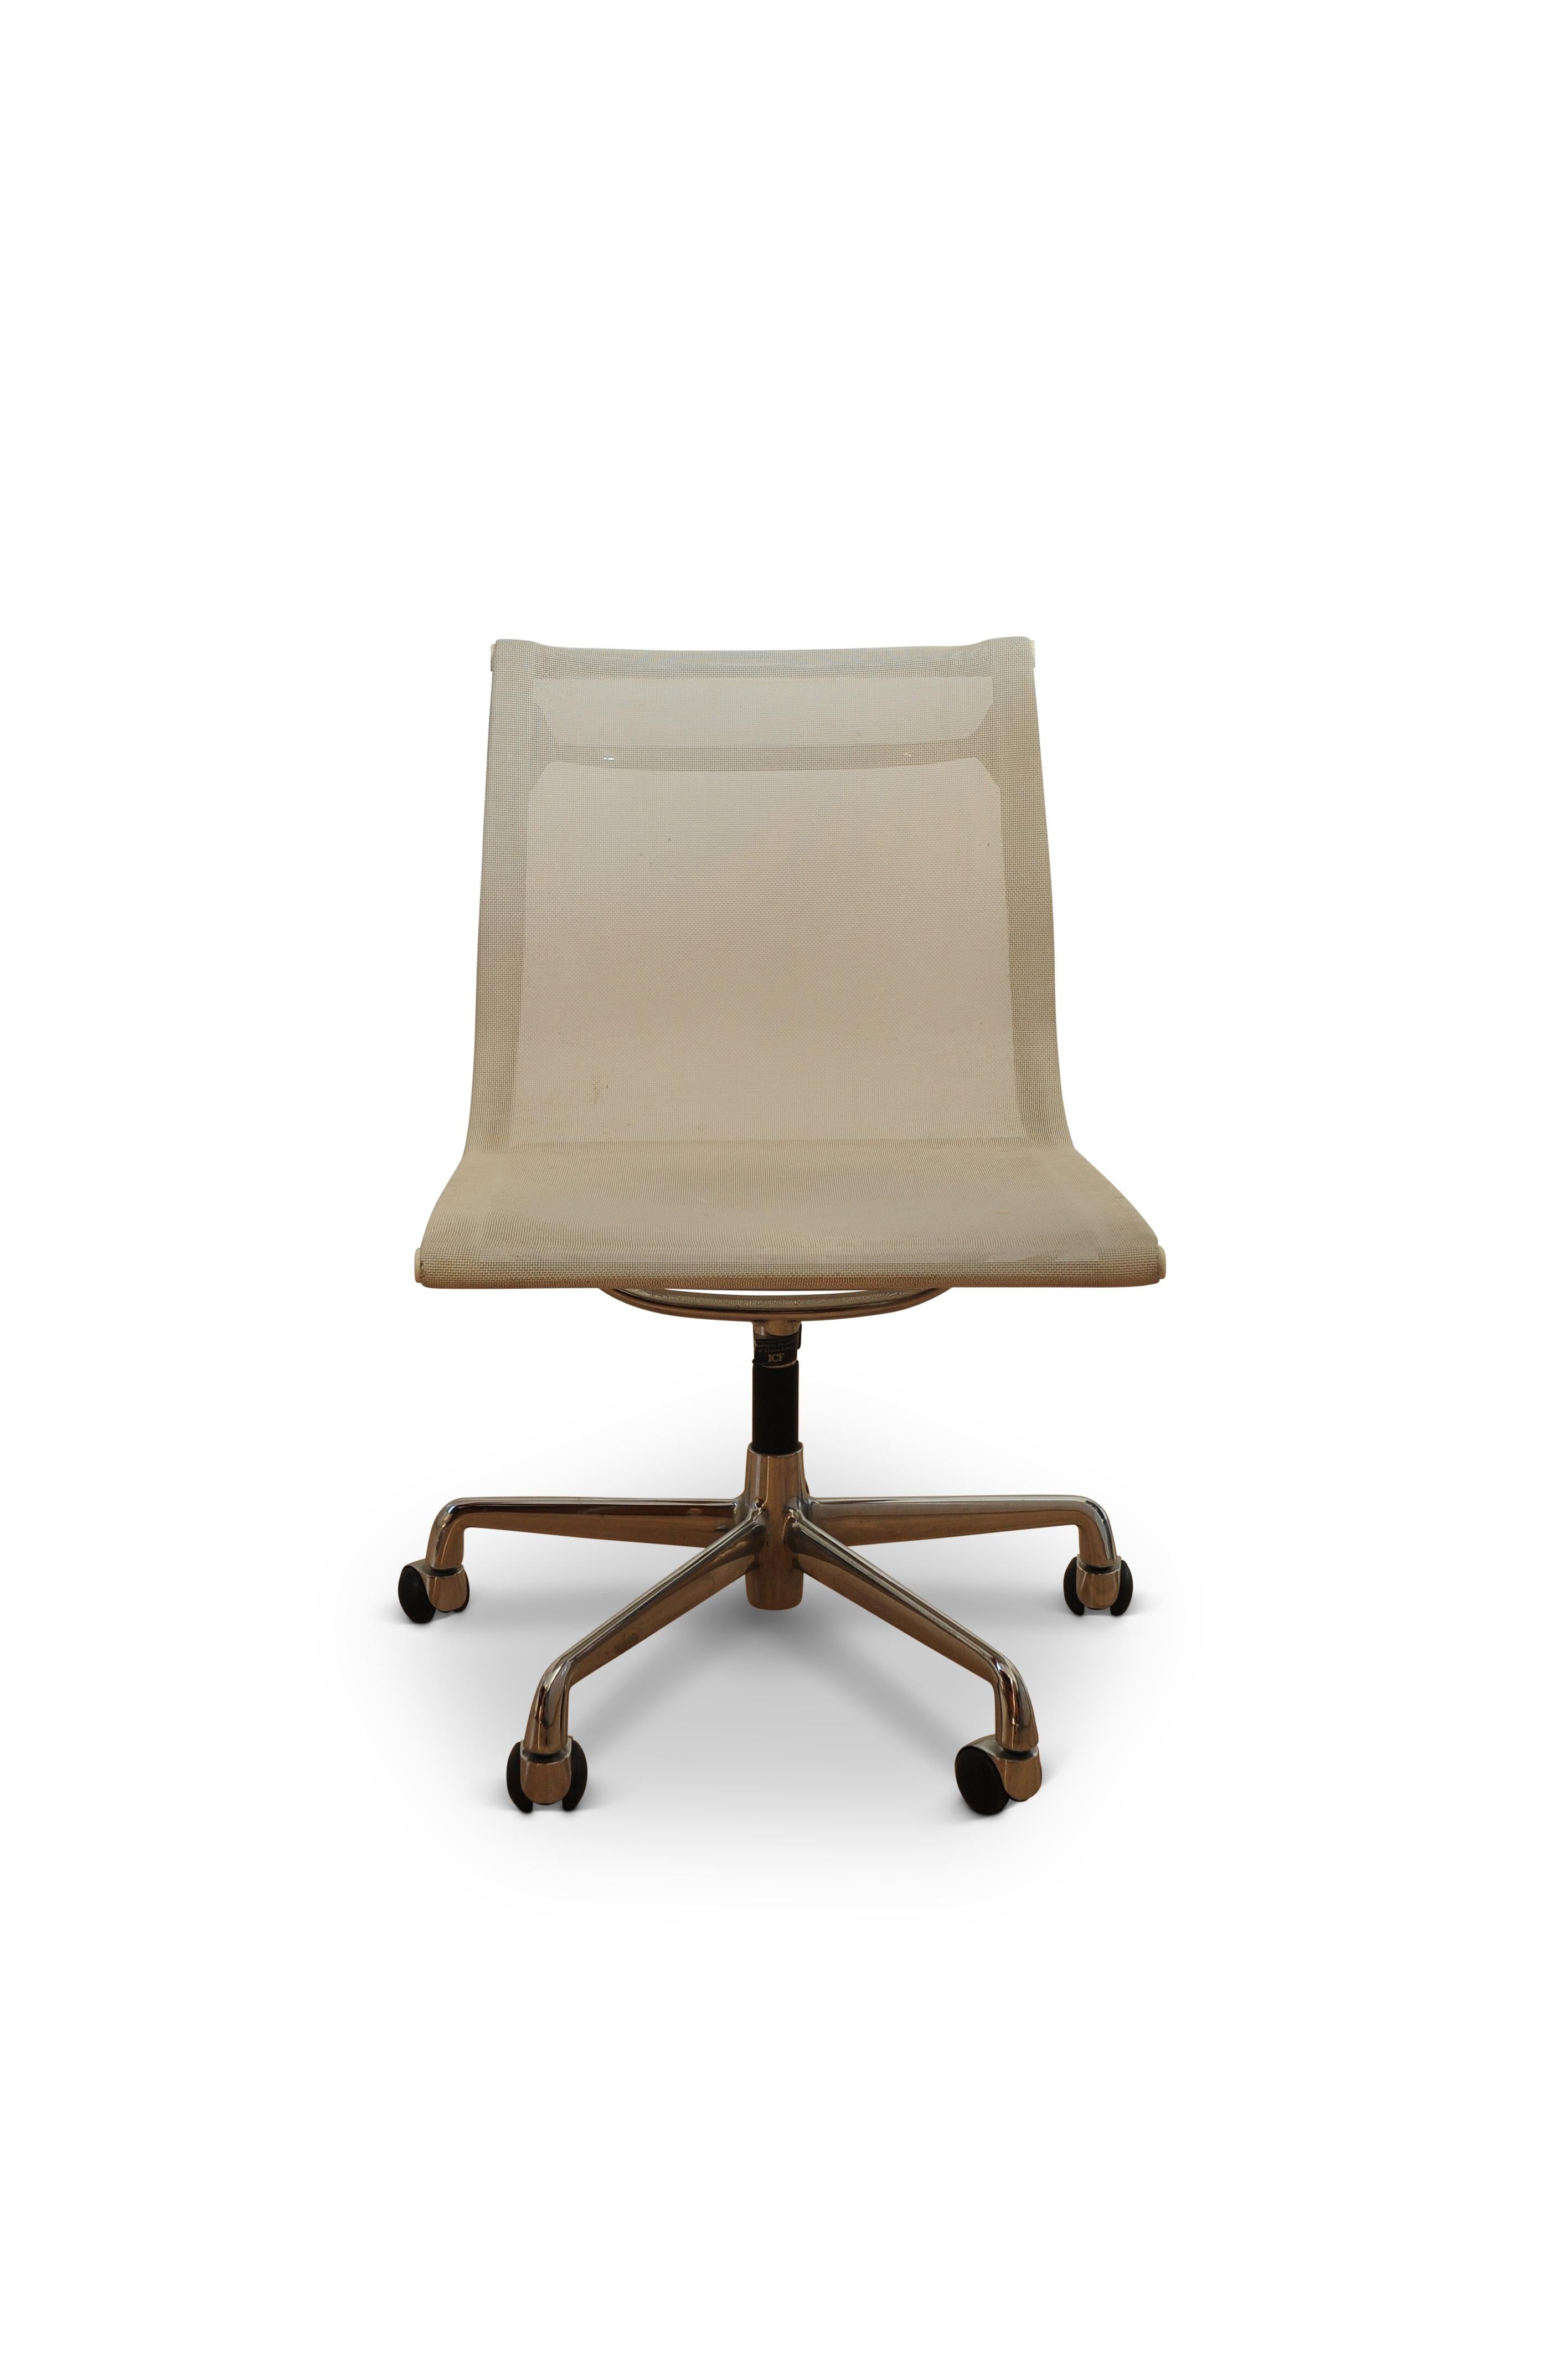 1958 Charles & Ray Eames for ICF white net weave EA108 office swivel chair.

With ICF label to underside of seating. 